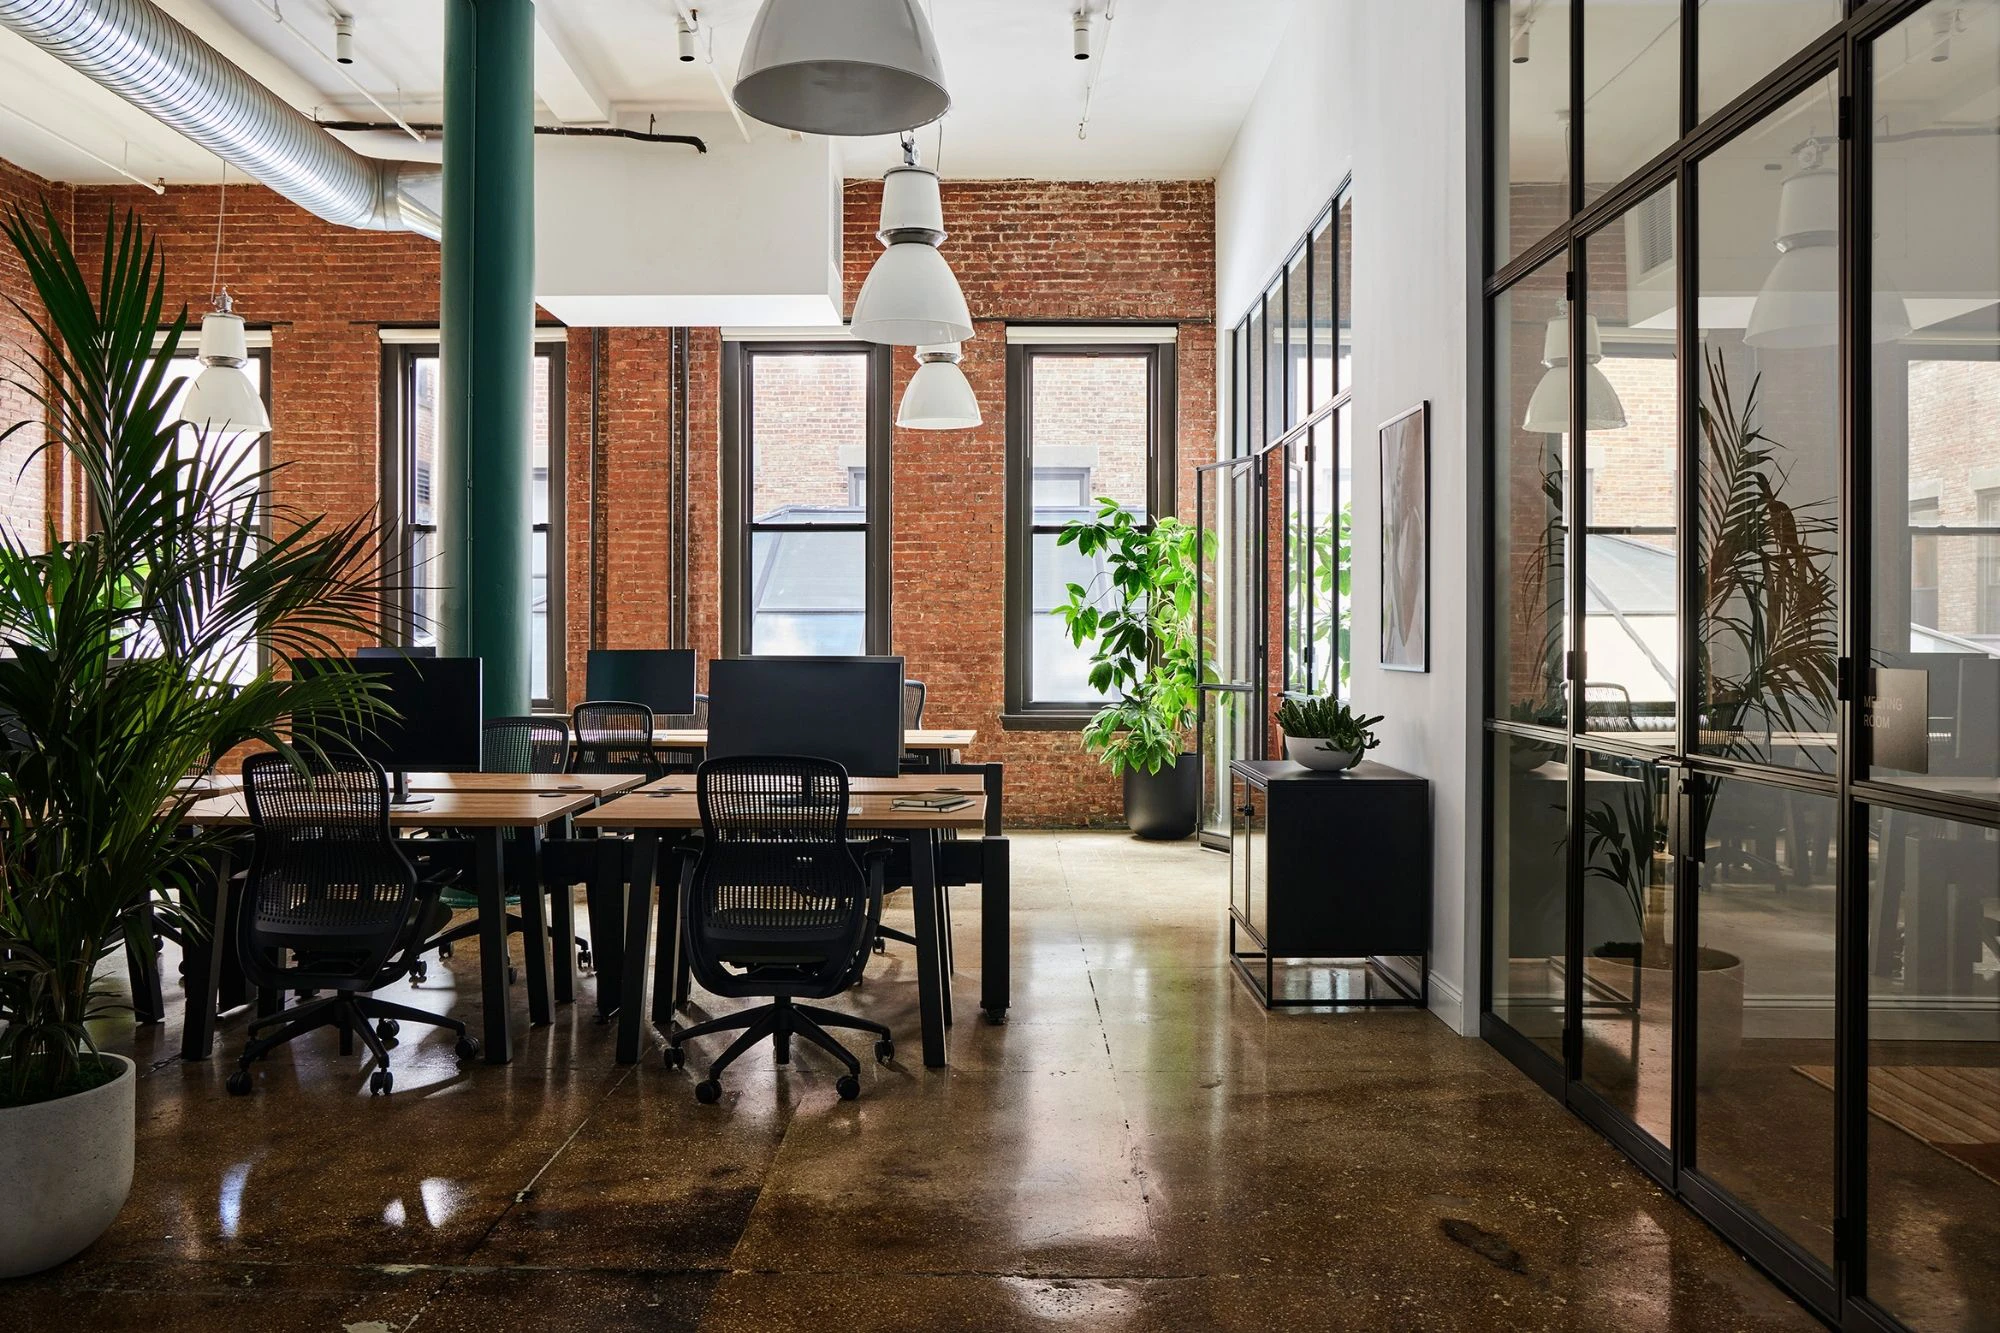 commercial office space design with open concept, brick walls and glass doors